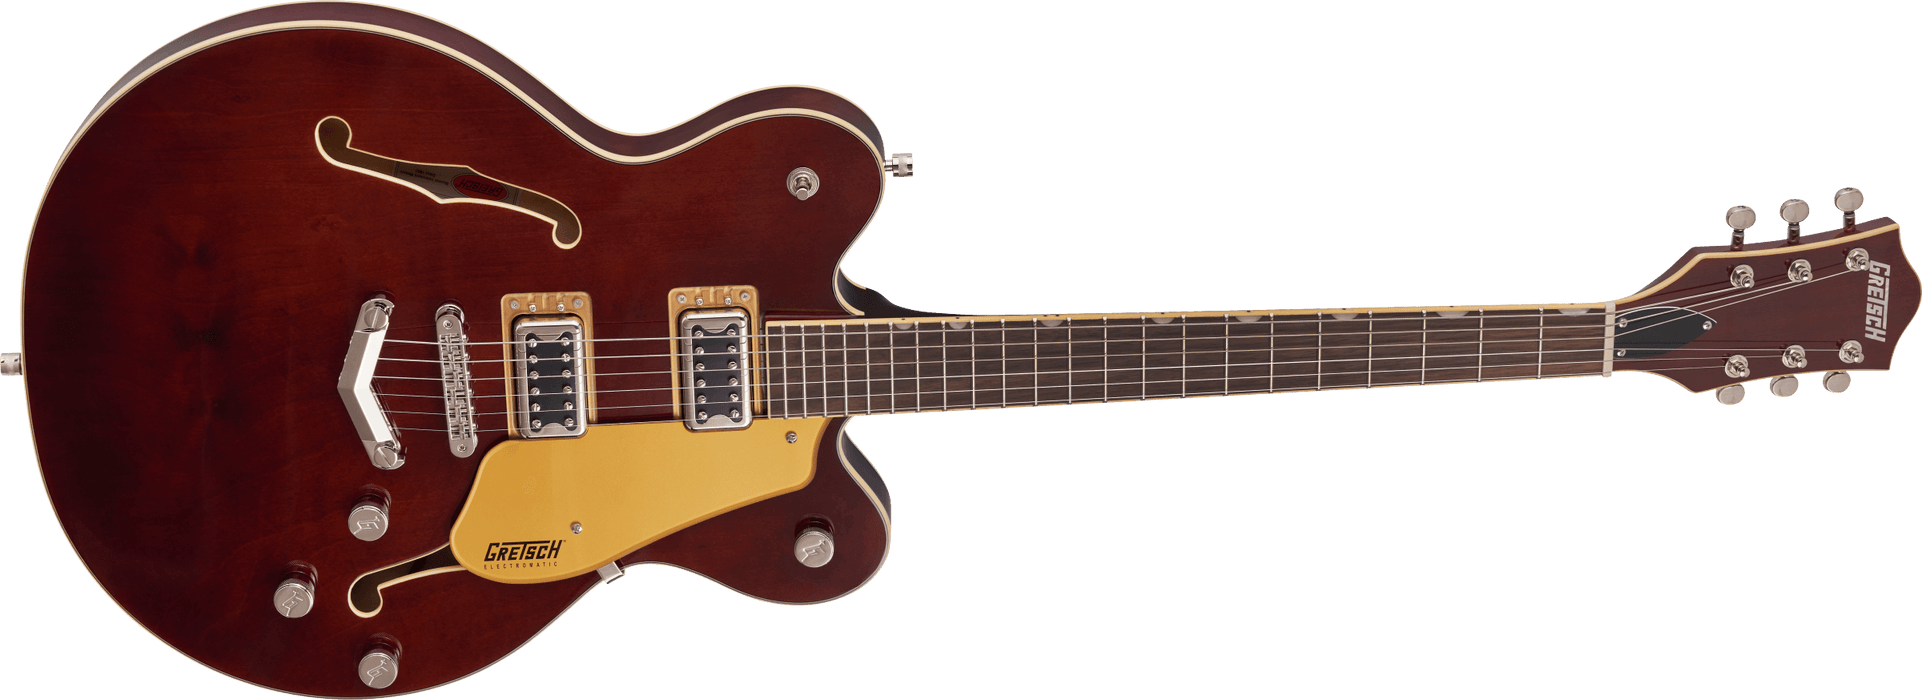 Gretsch G5622 Electromatic® Center Block Double-Cut with V-Stoptail, Laurel Fingerboard, Aged Walnut